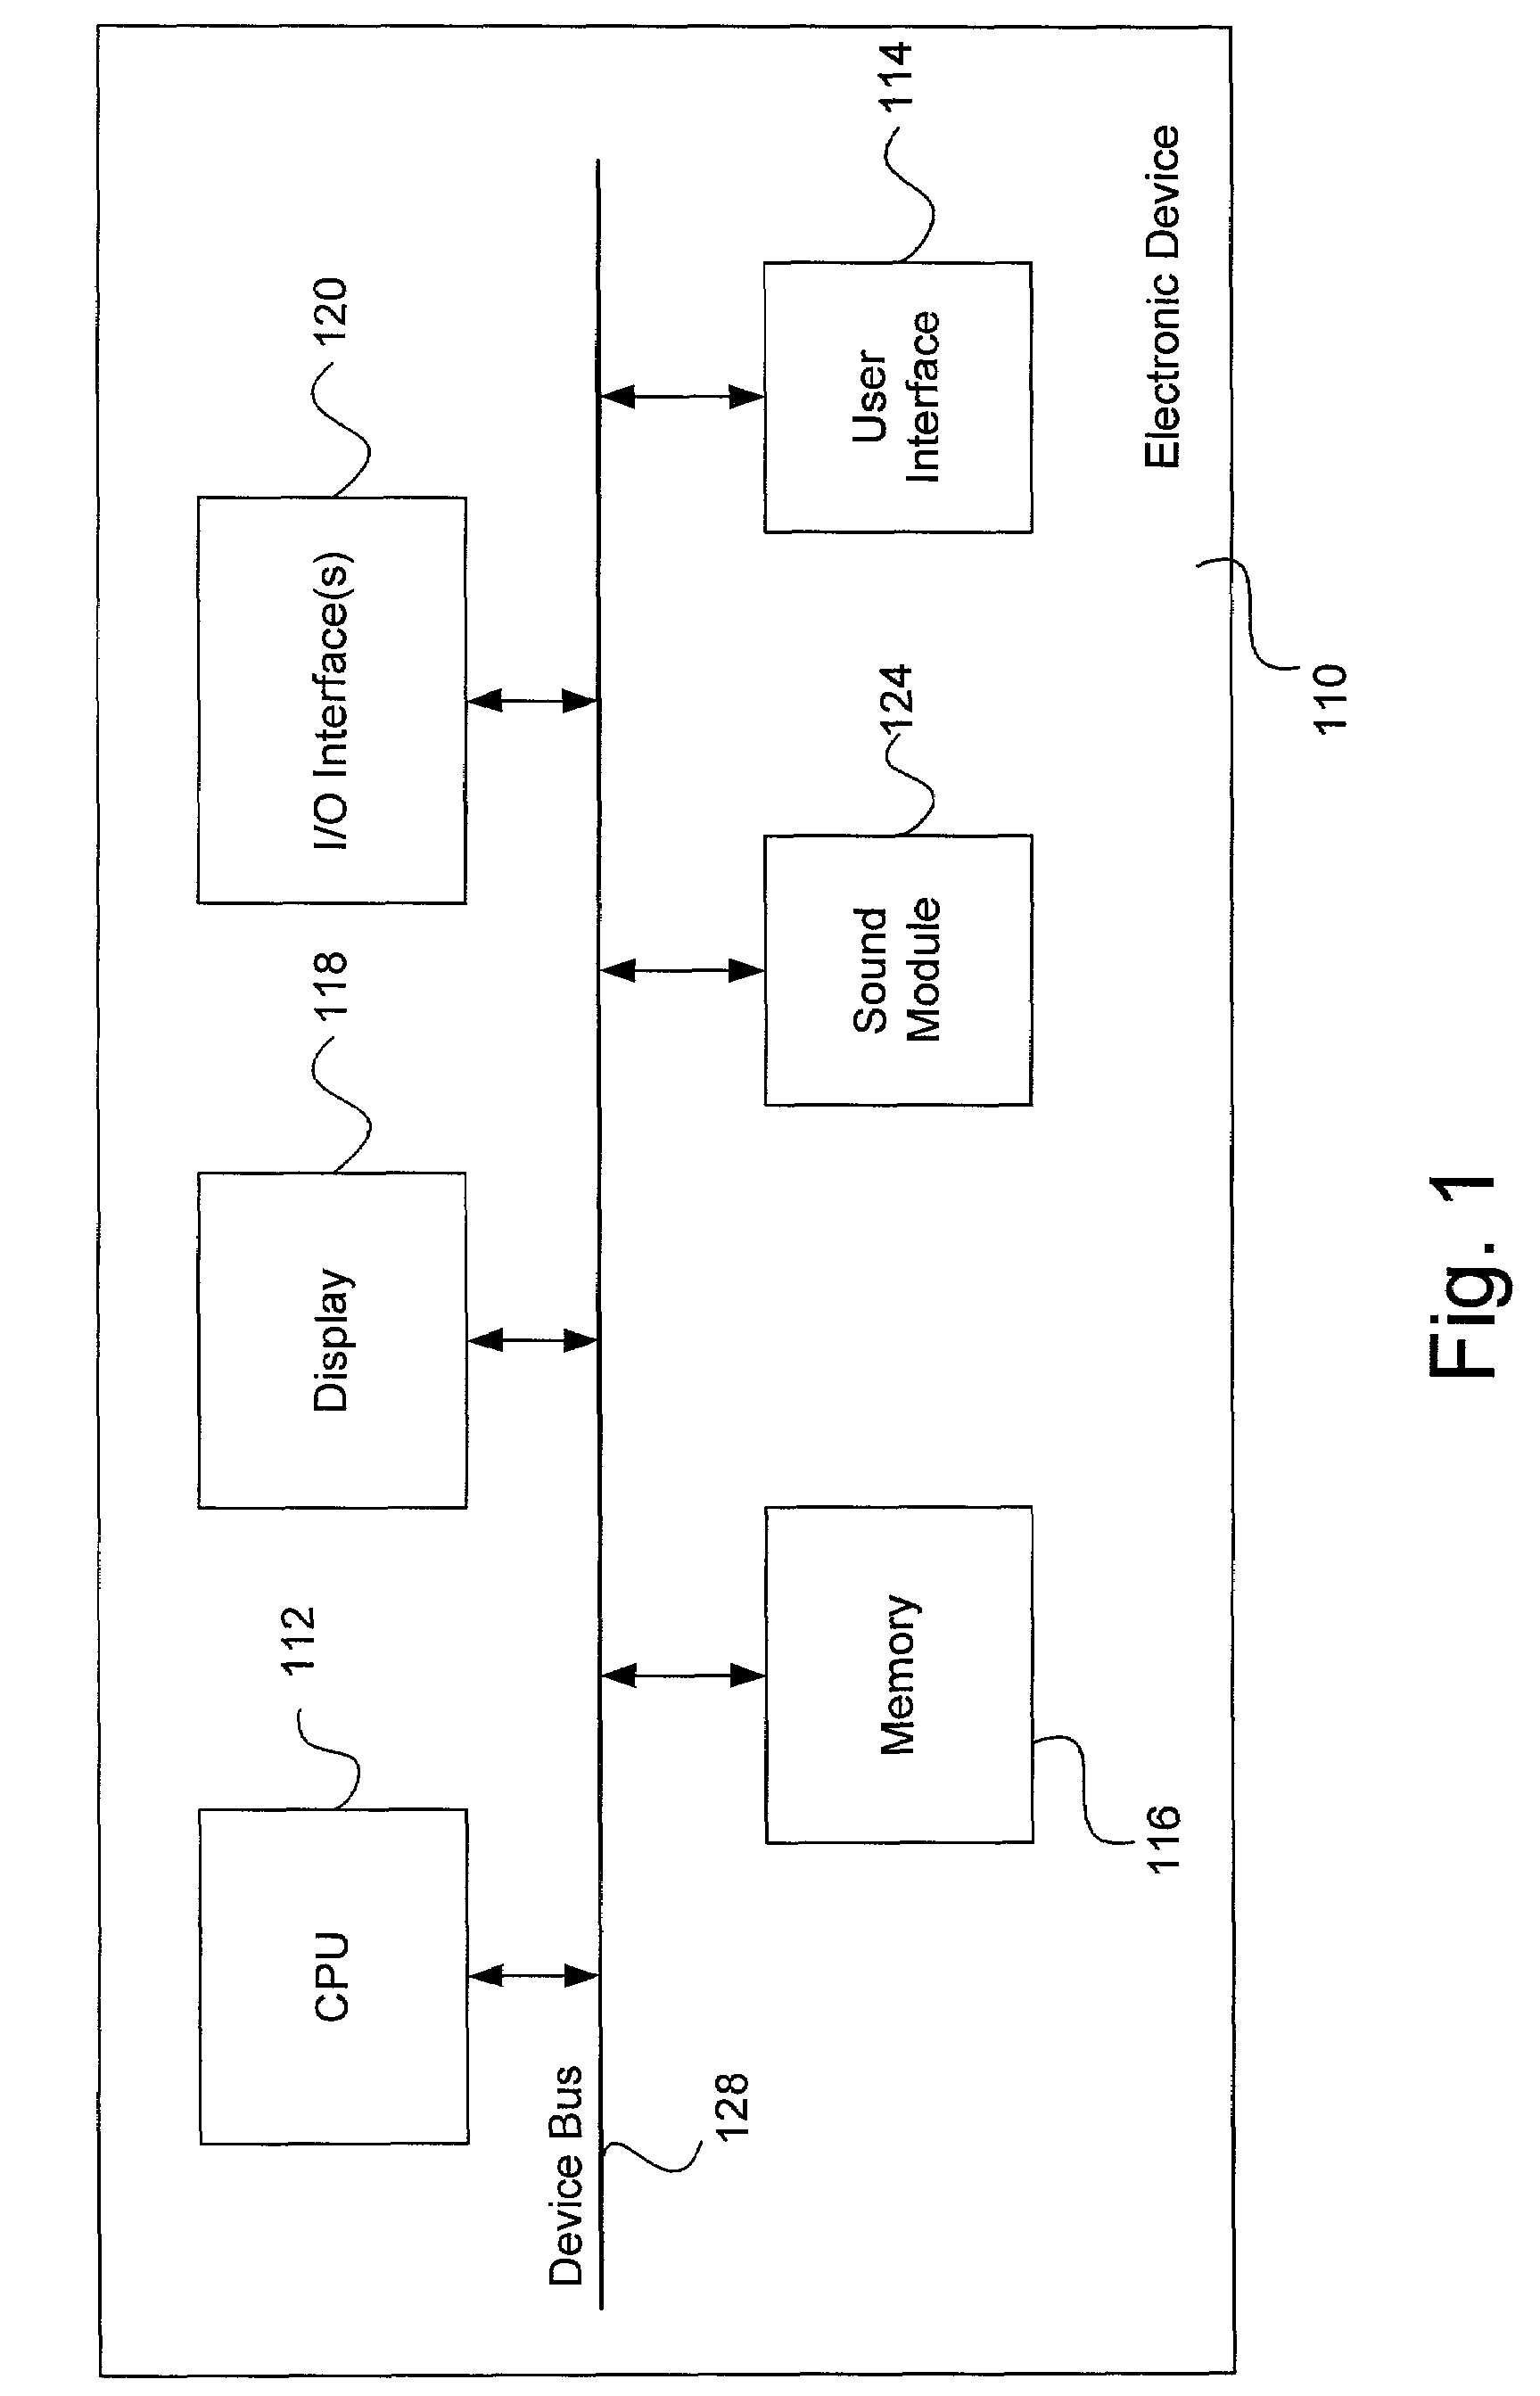 System and method for efficiently performing data transfer operations